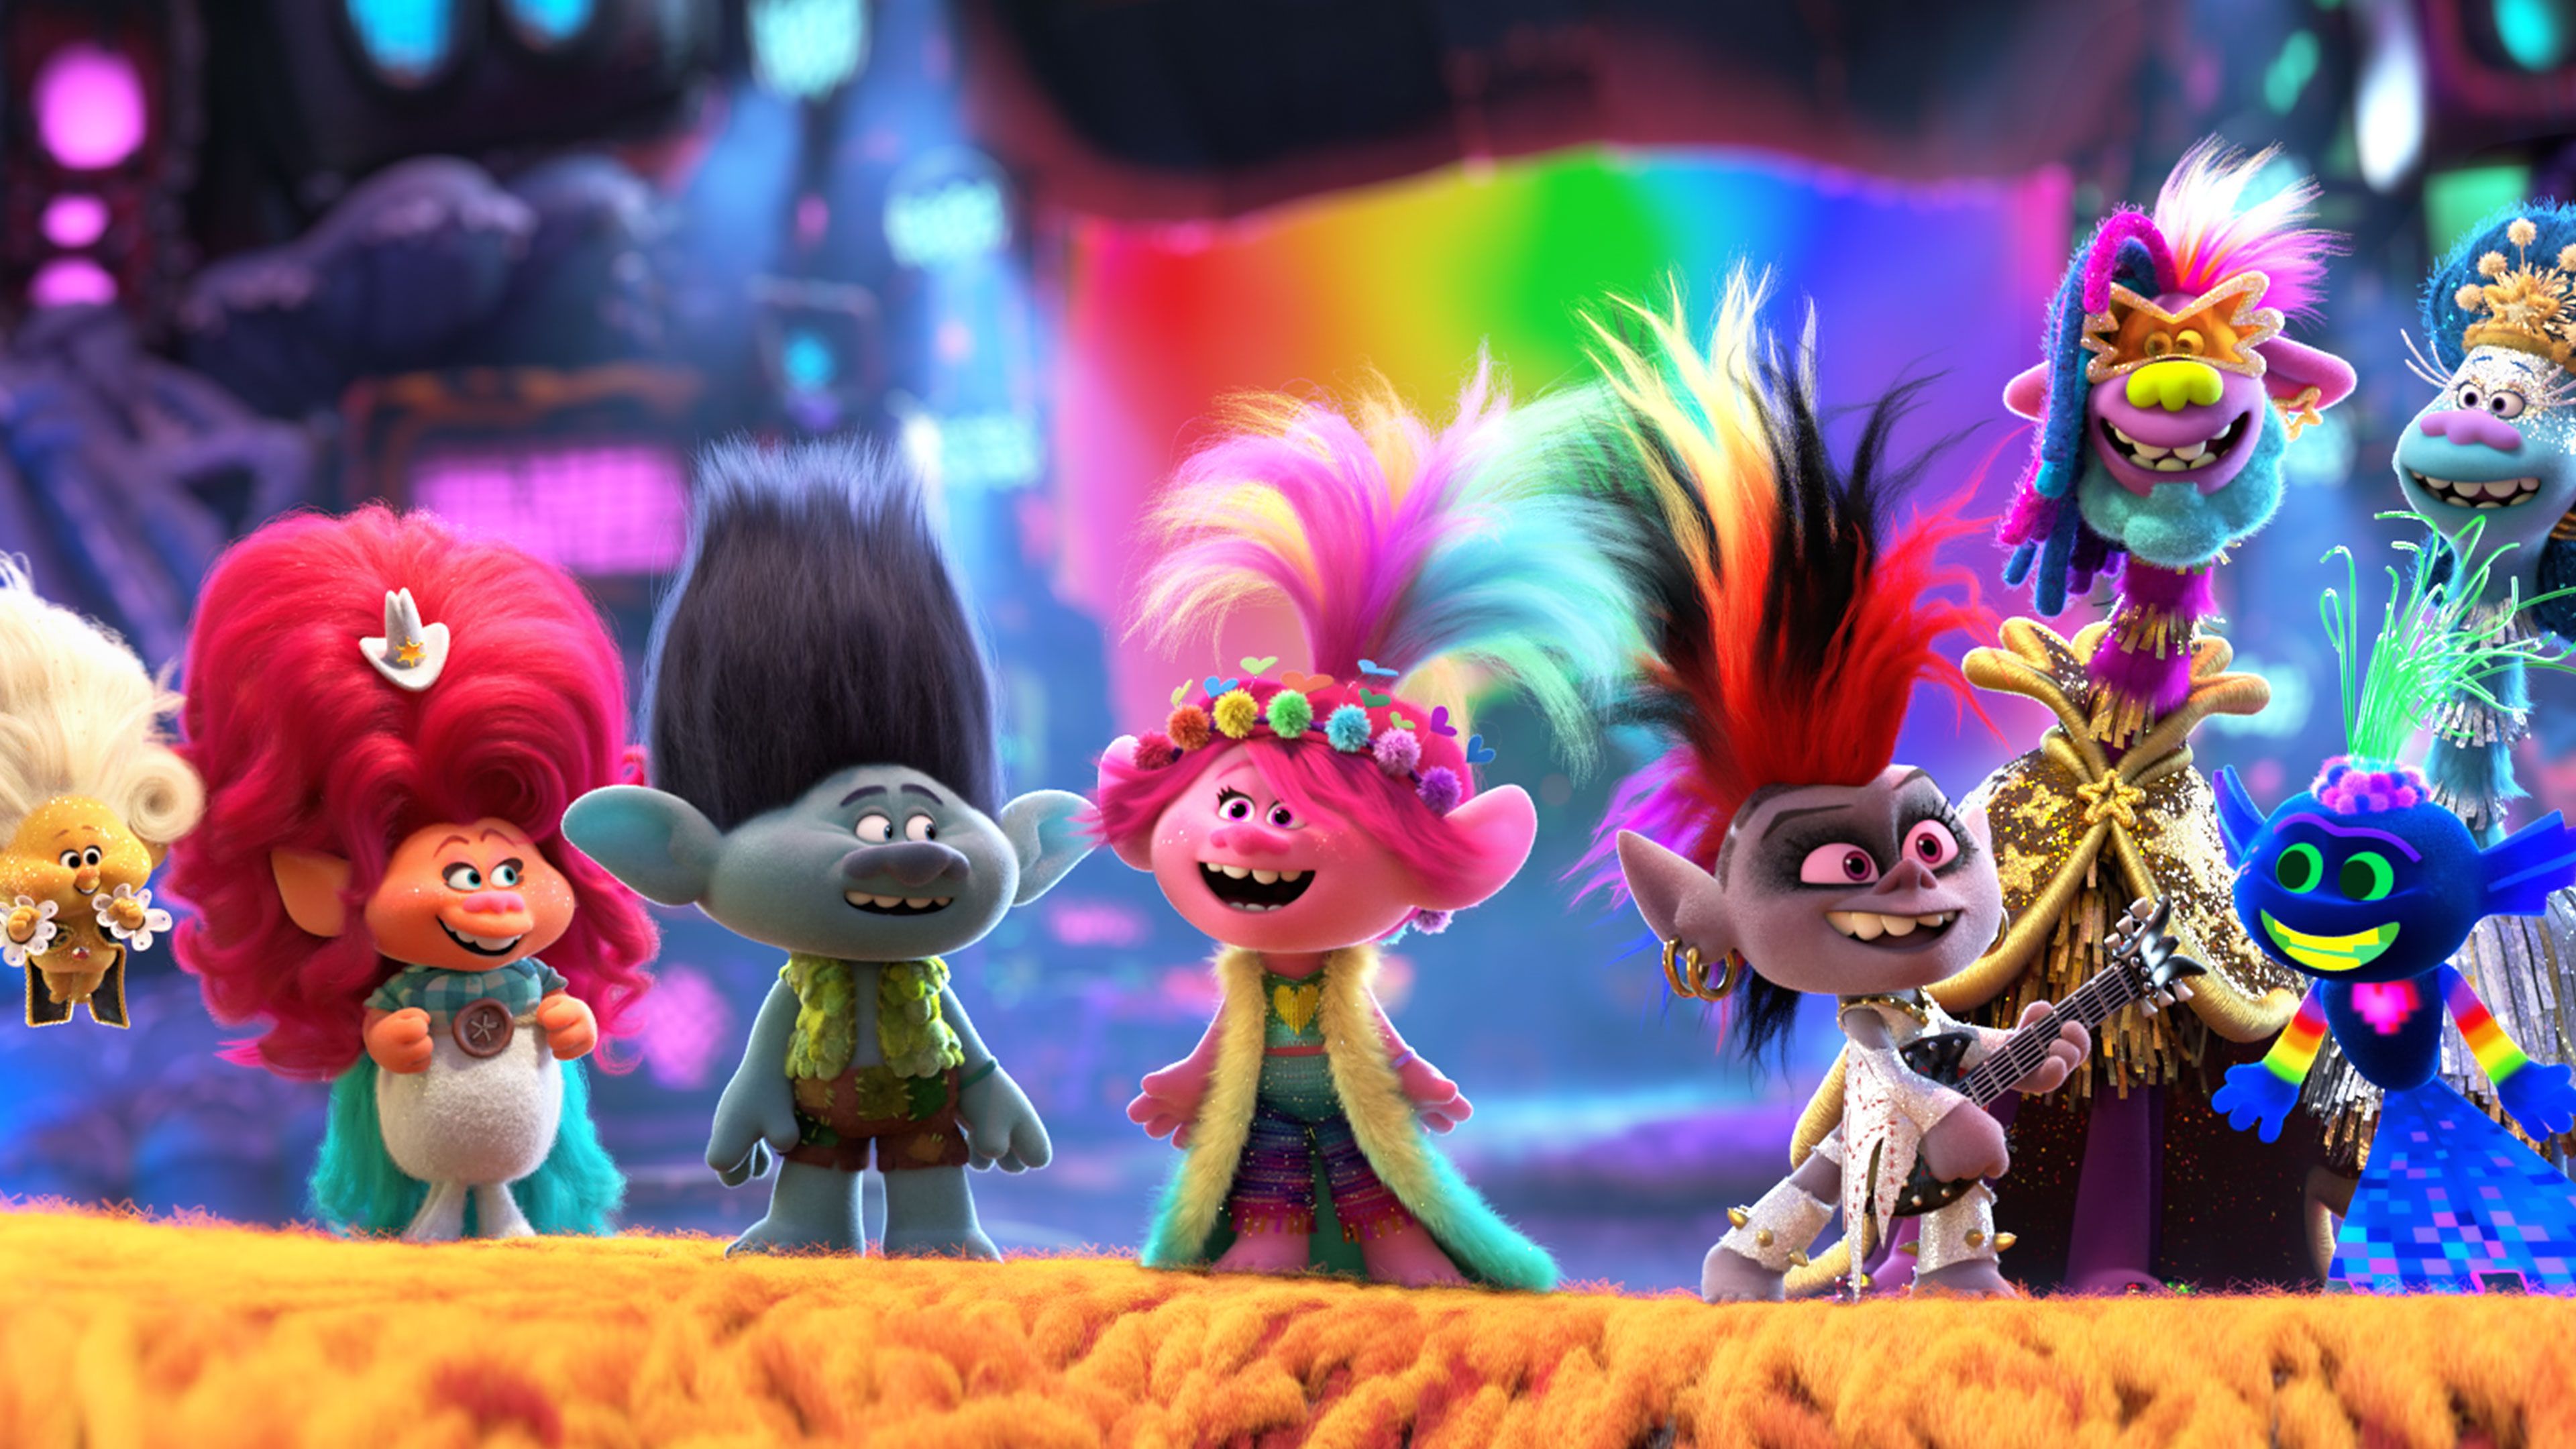 Trolls World Tour Is Now Available To Own On VOD | vlr.eng.br